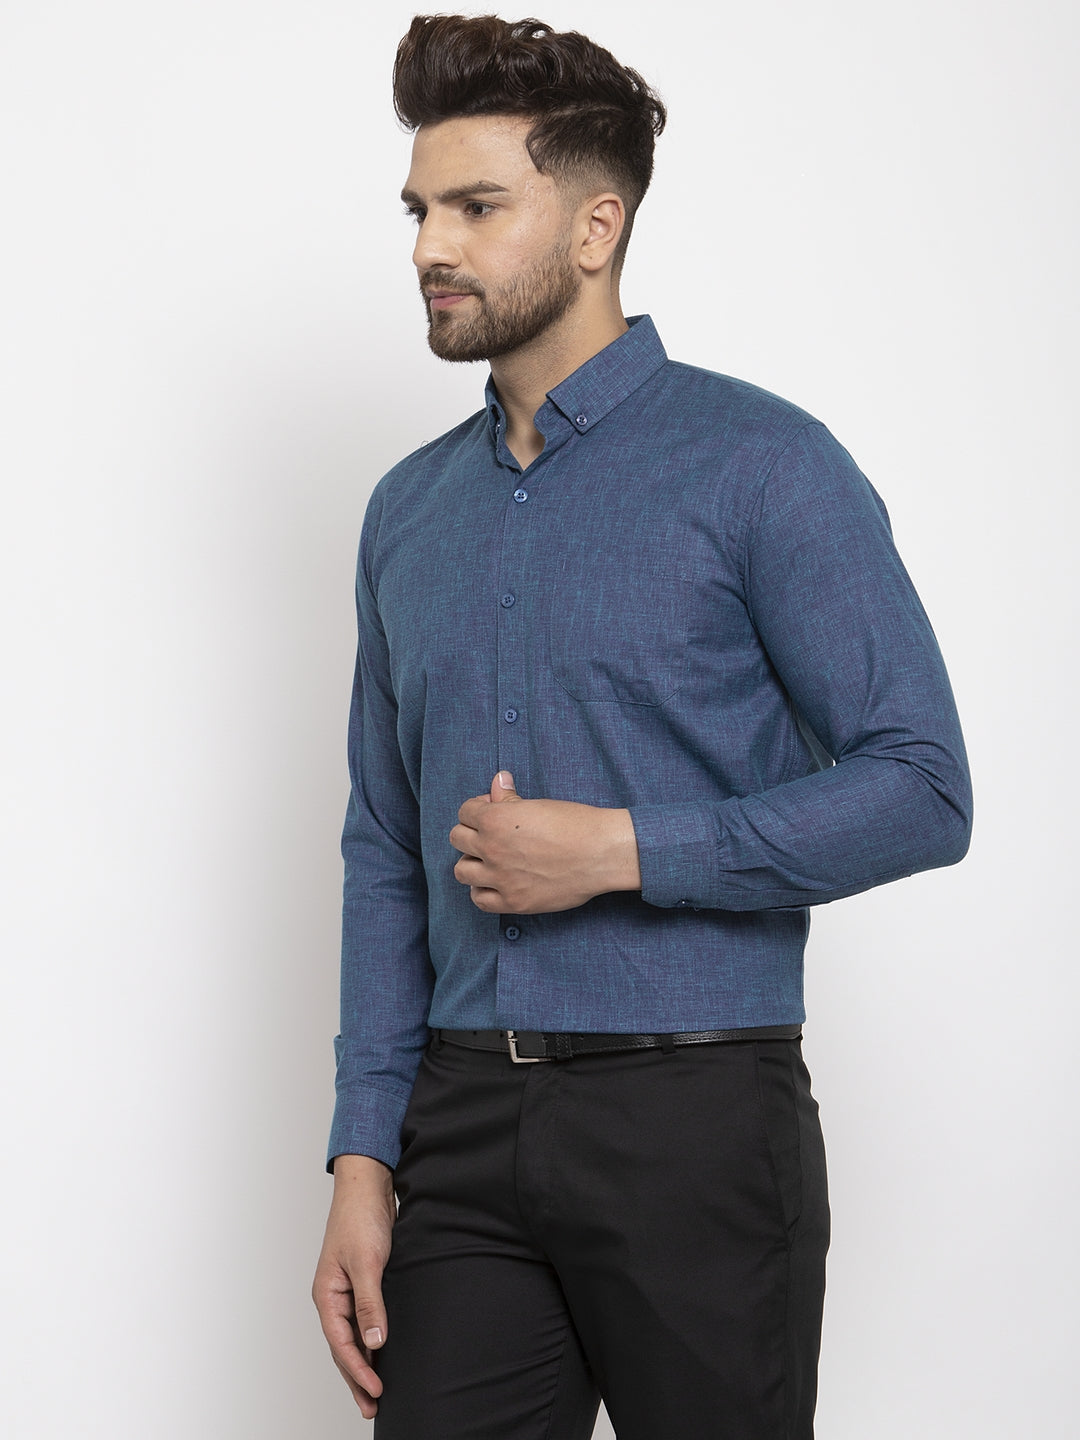 Men's Blue Cotton Solid Button Down Formal Shirts ( SF 753Teal ) - Jainish